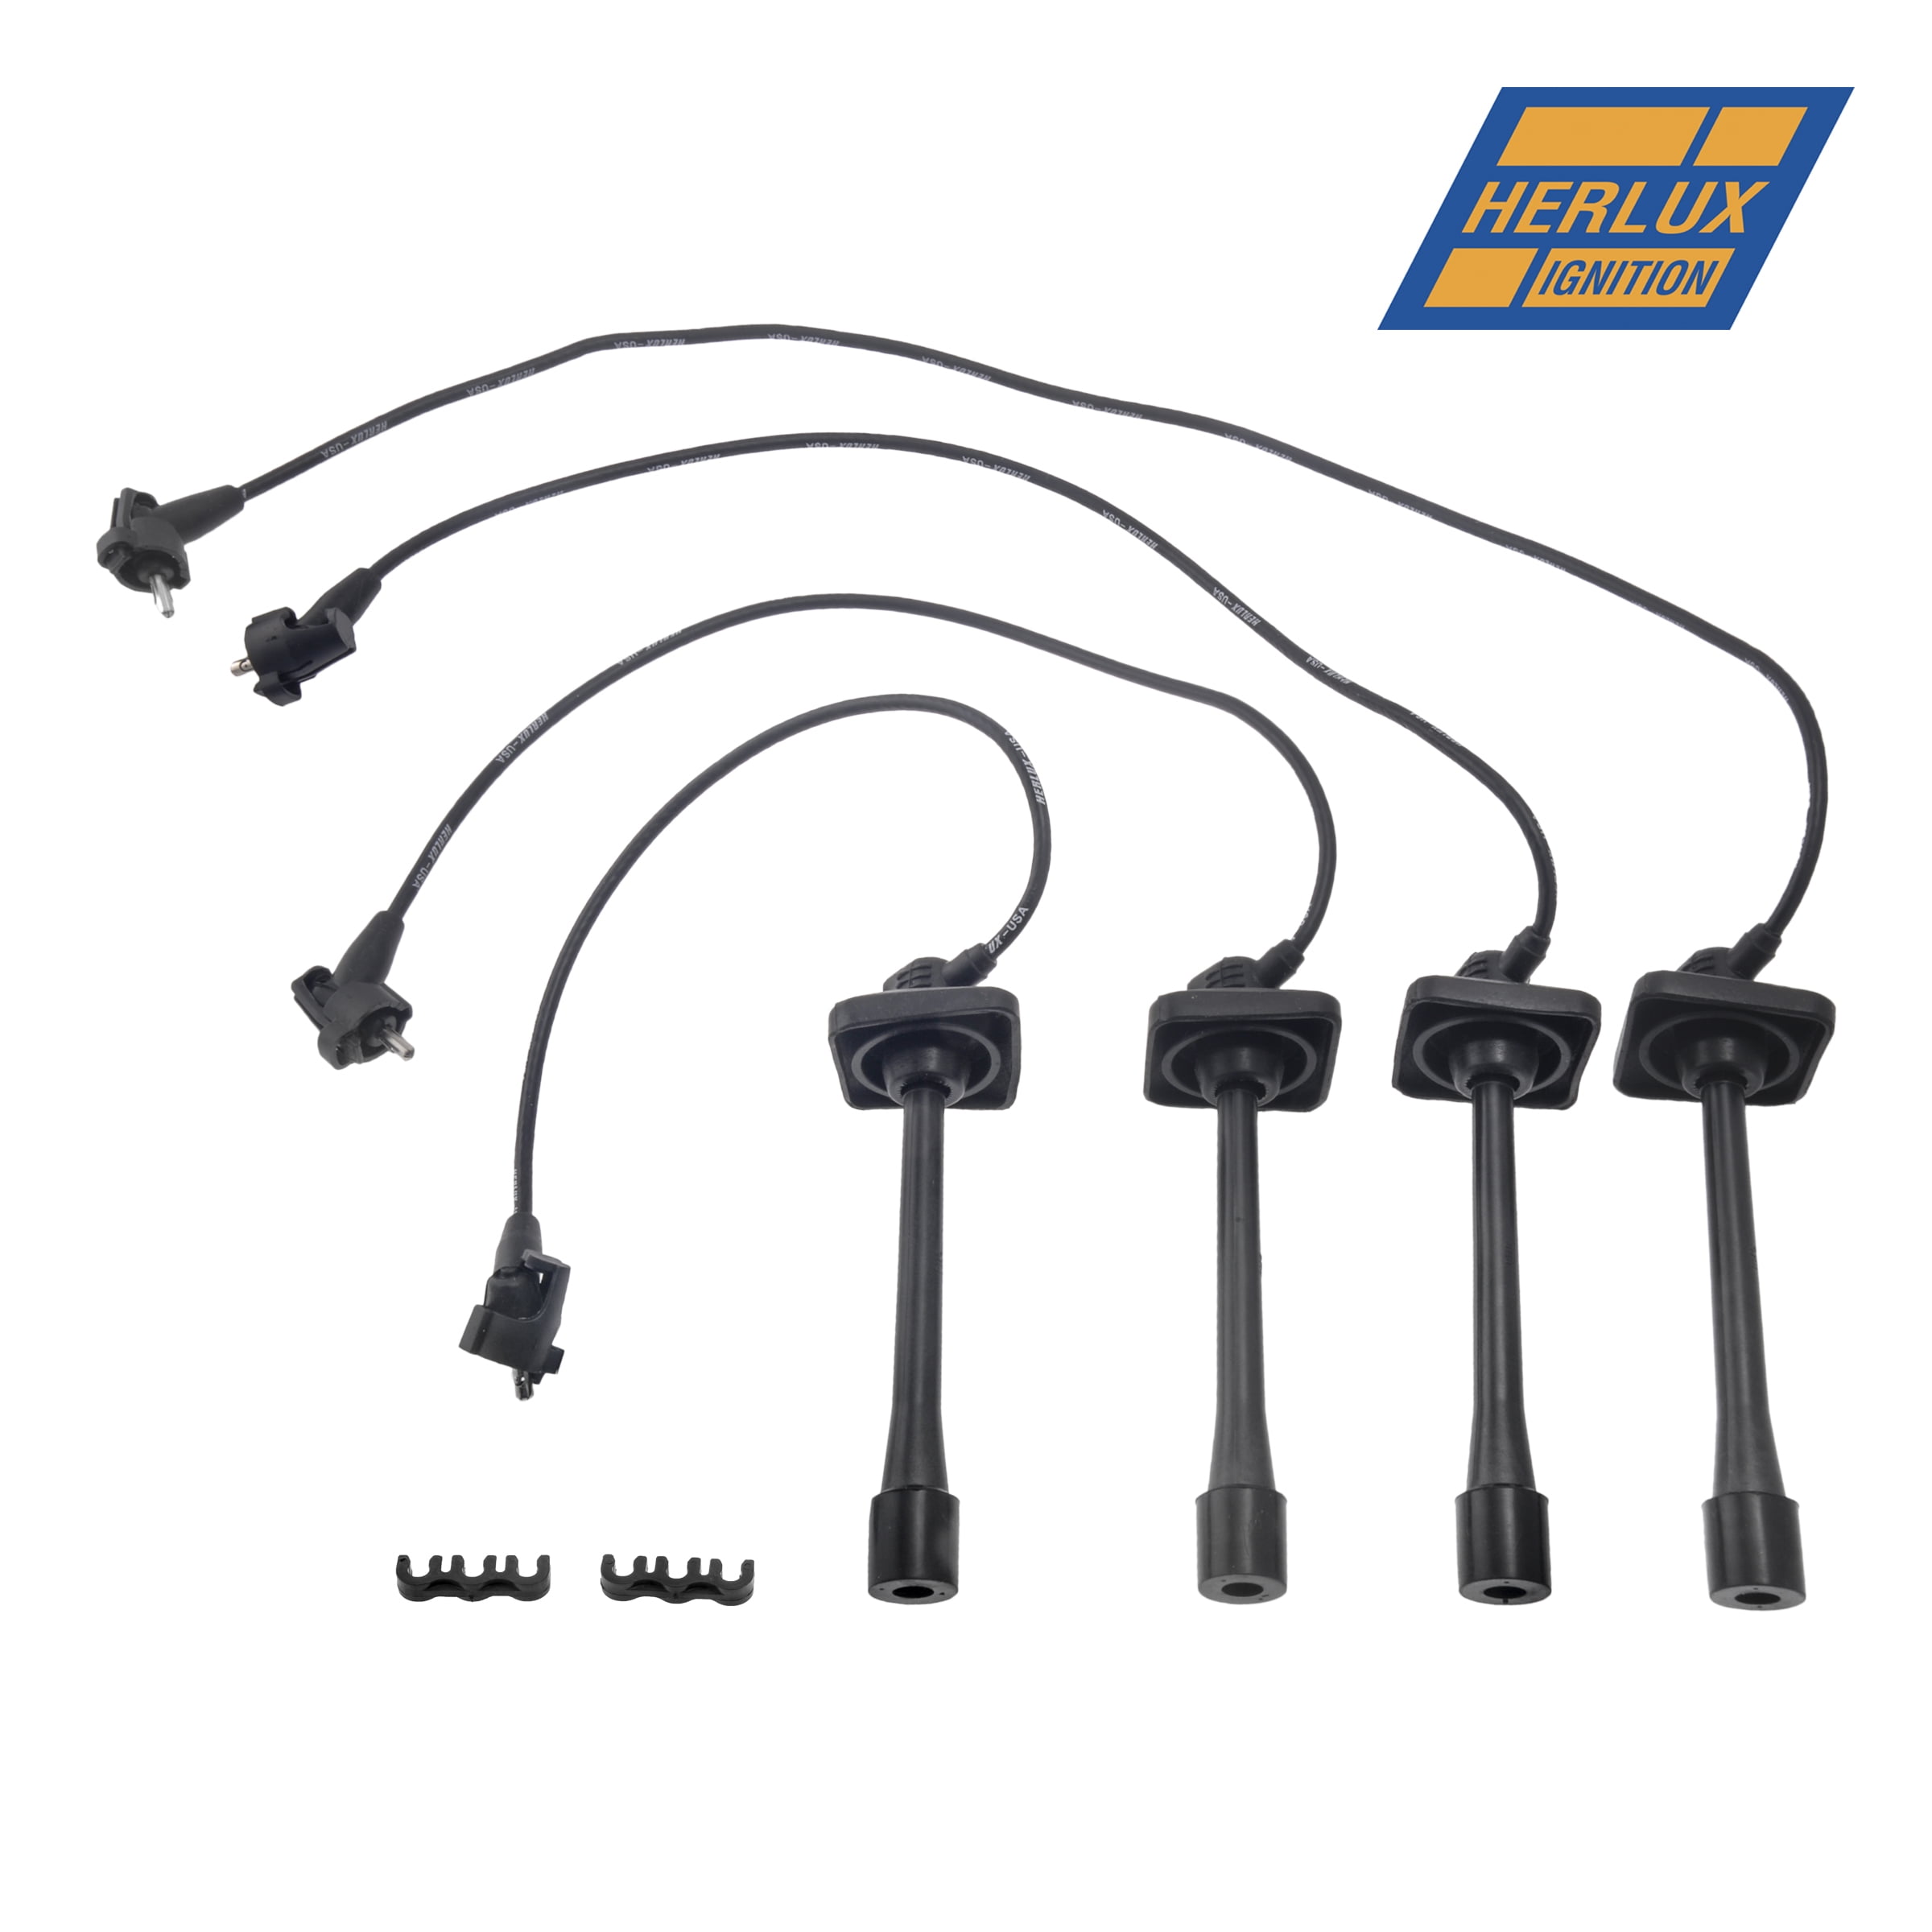 TUPARTS Pack of 4 Ignition Wire Sets Compatible with Toyota Camry/Celica/ MR2/ RAV4 1992-1999 